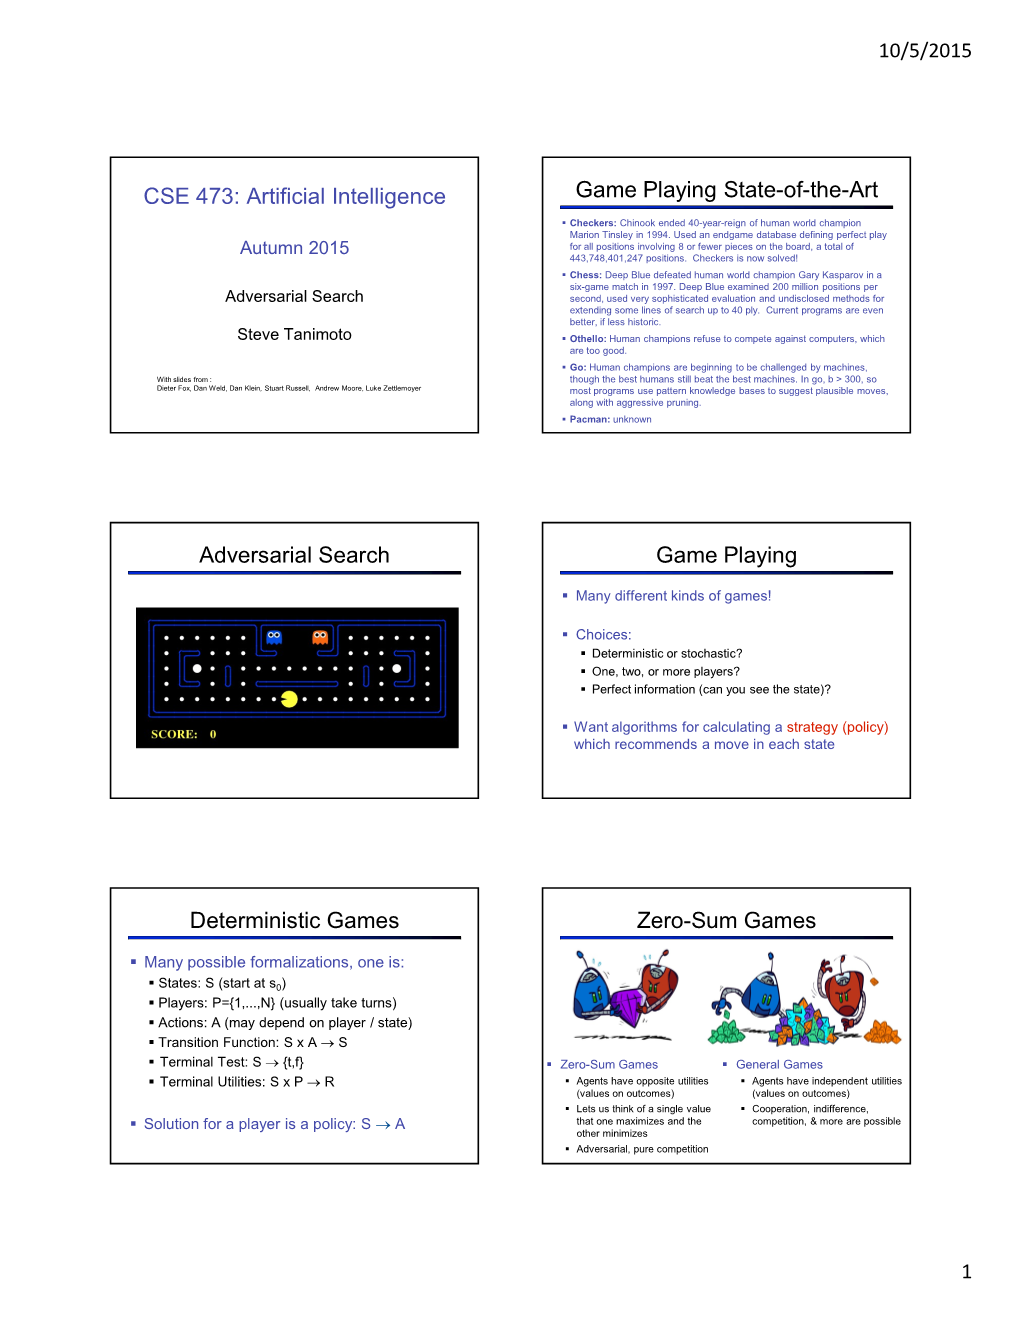 CSE 473: Artificial Intelligence Game Playing State-Of-The-Art Adversarial